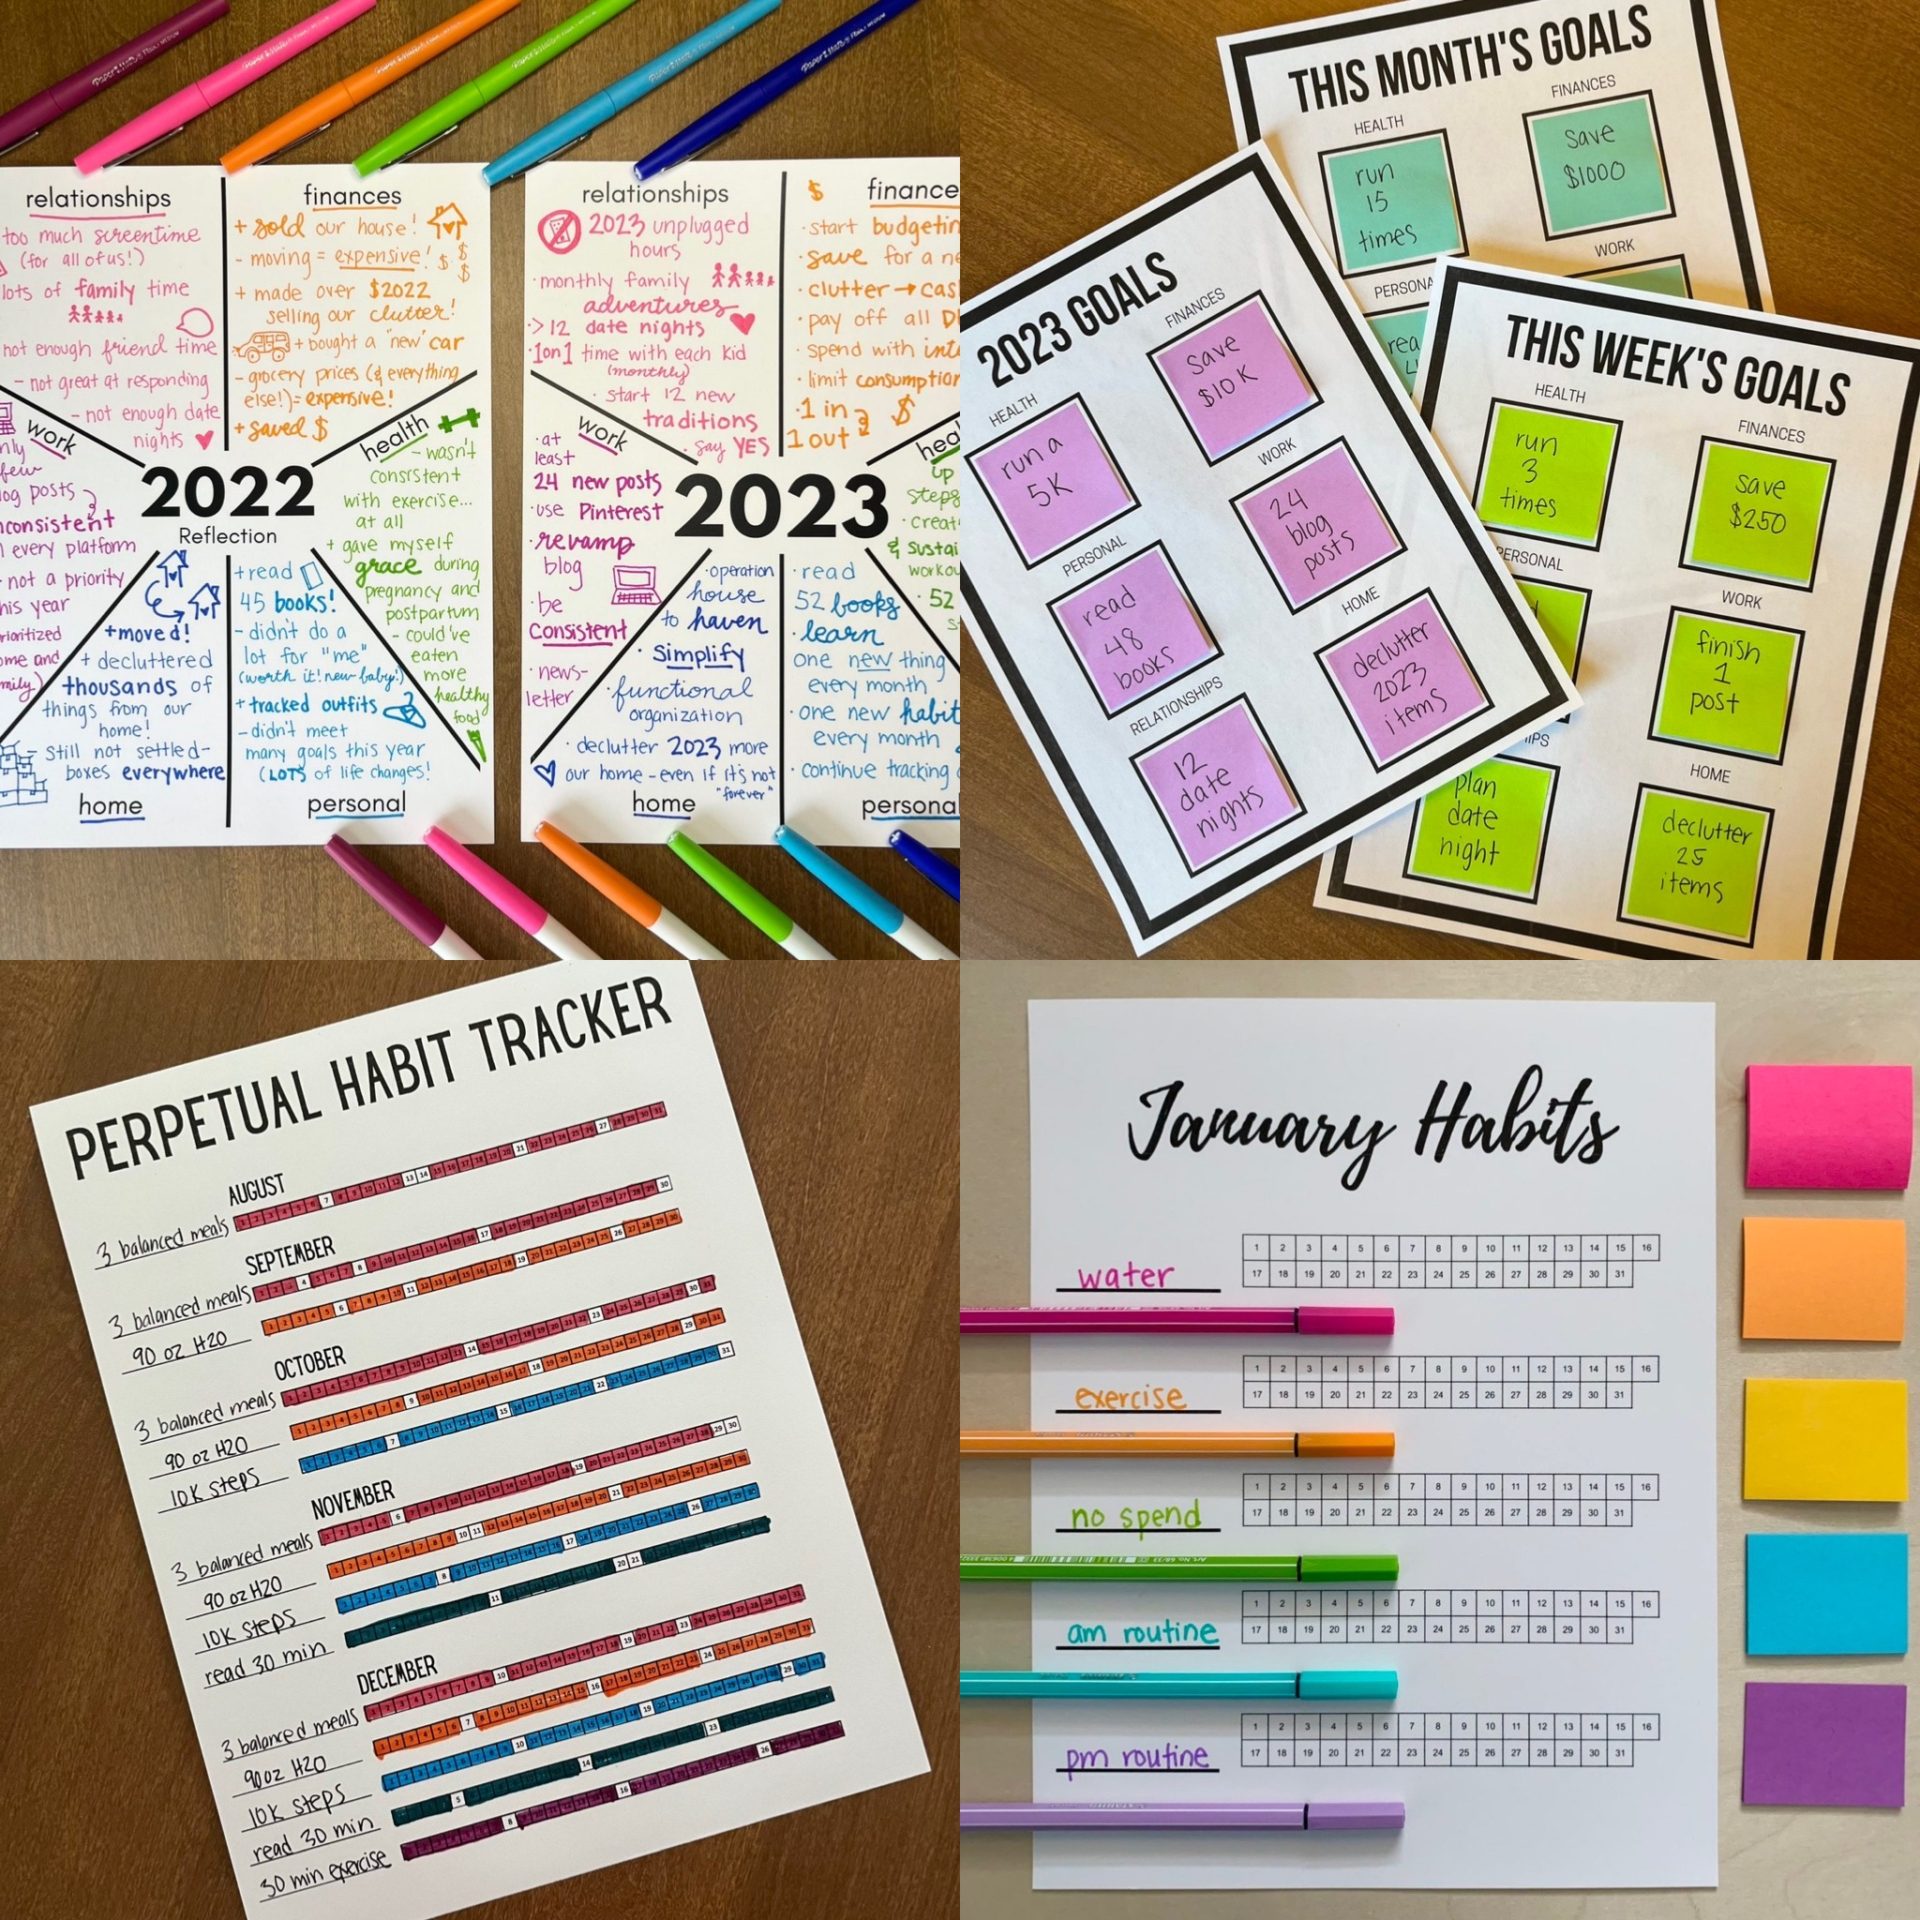 Find Your Balance with a Free Printable Wellness Journal